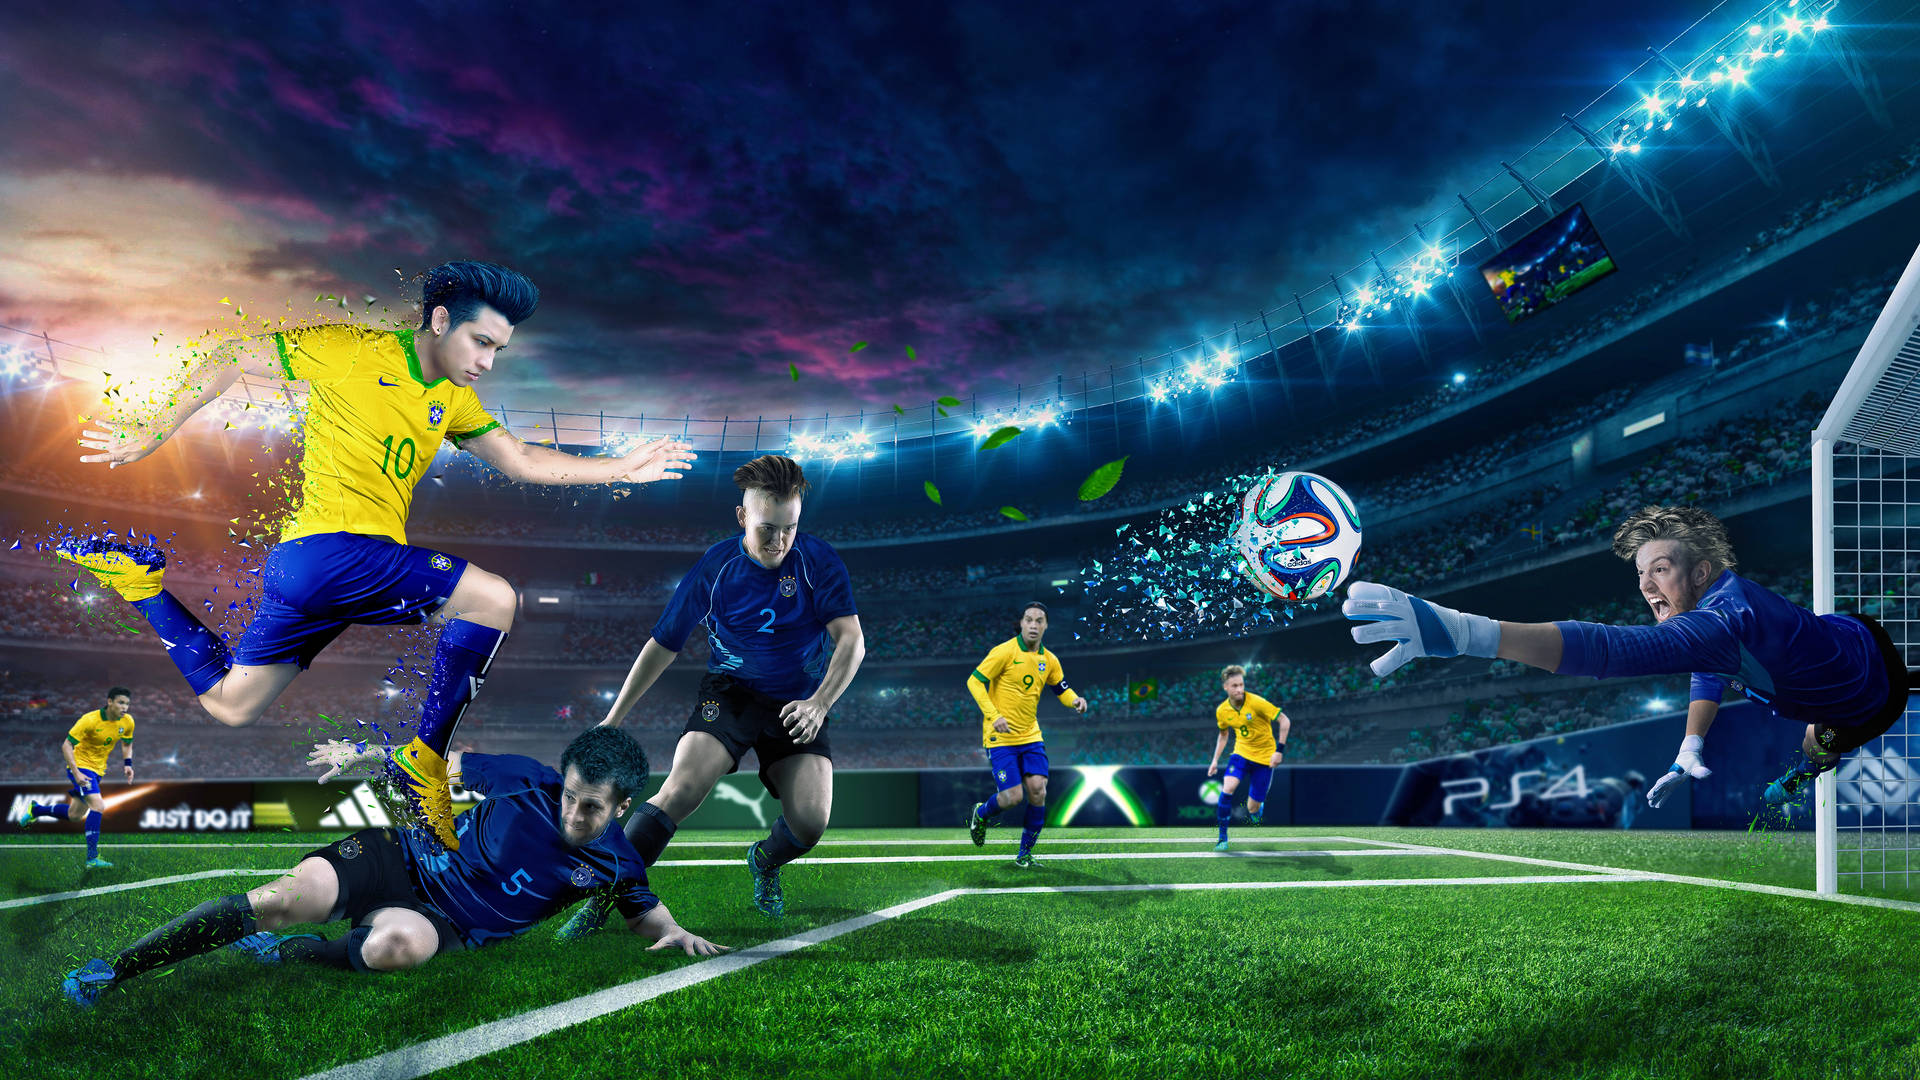 Dynamic Soccer Kick In Action On The Field Wallpaper